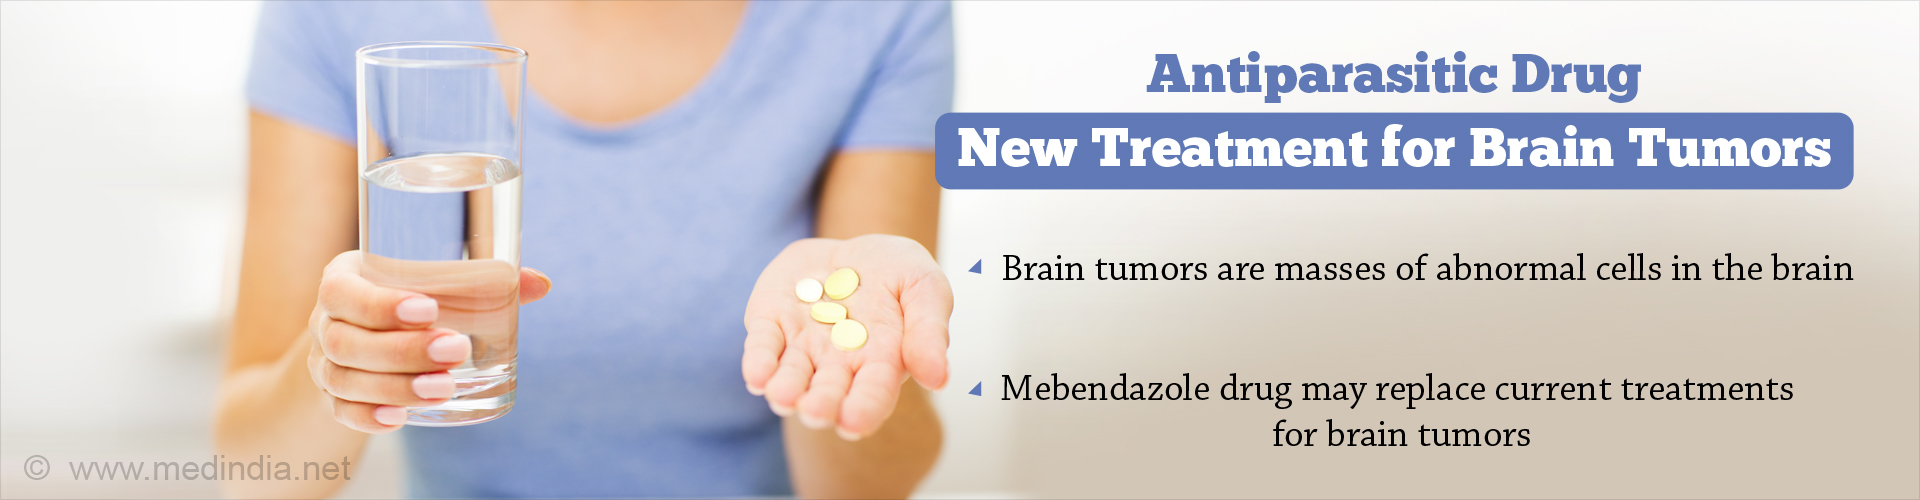 Antiparasitic drug new treatment for brain tumors
- Brain tumors are masses of abnormal cells in the brain
- Mebendazole drug may replace current treatments for the brain tumors